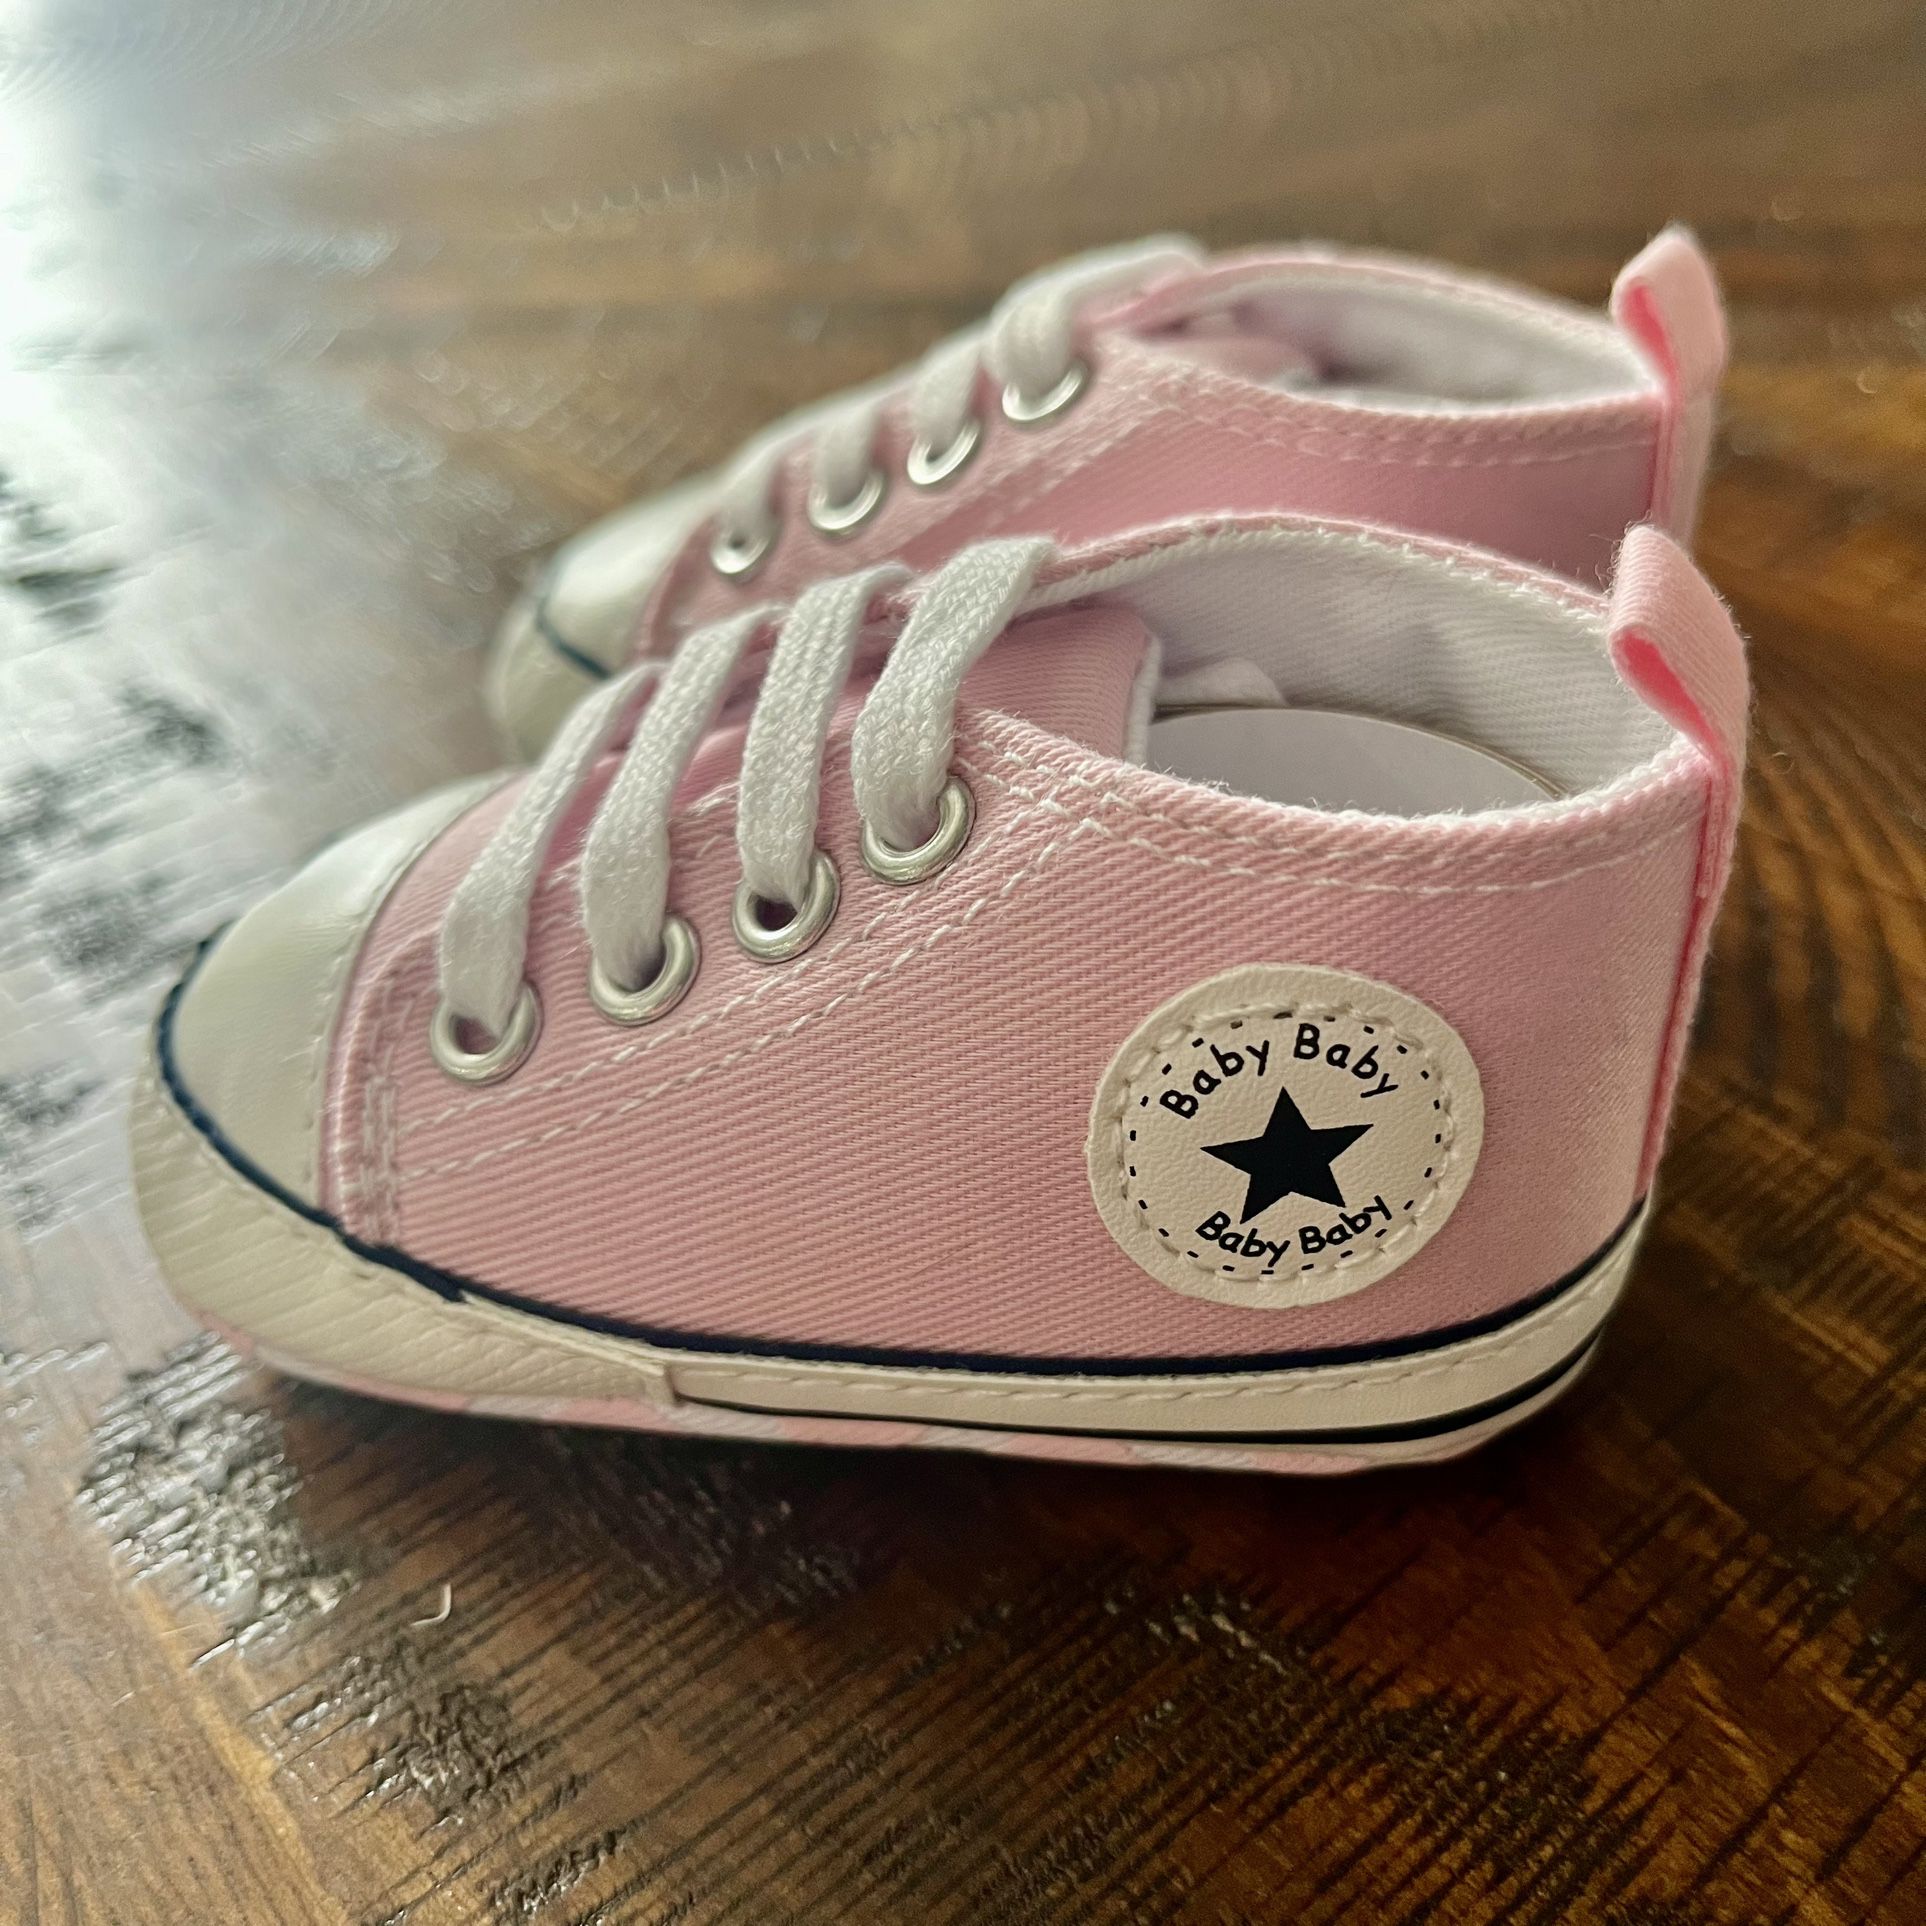 New - Baby Girl pink converse style sneaker shoes